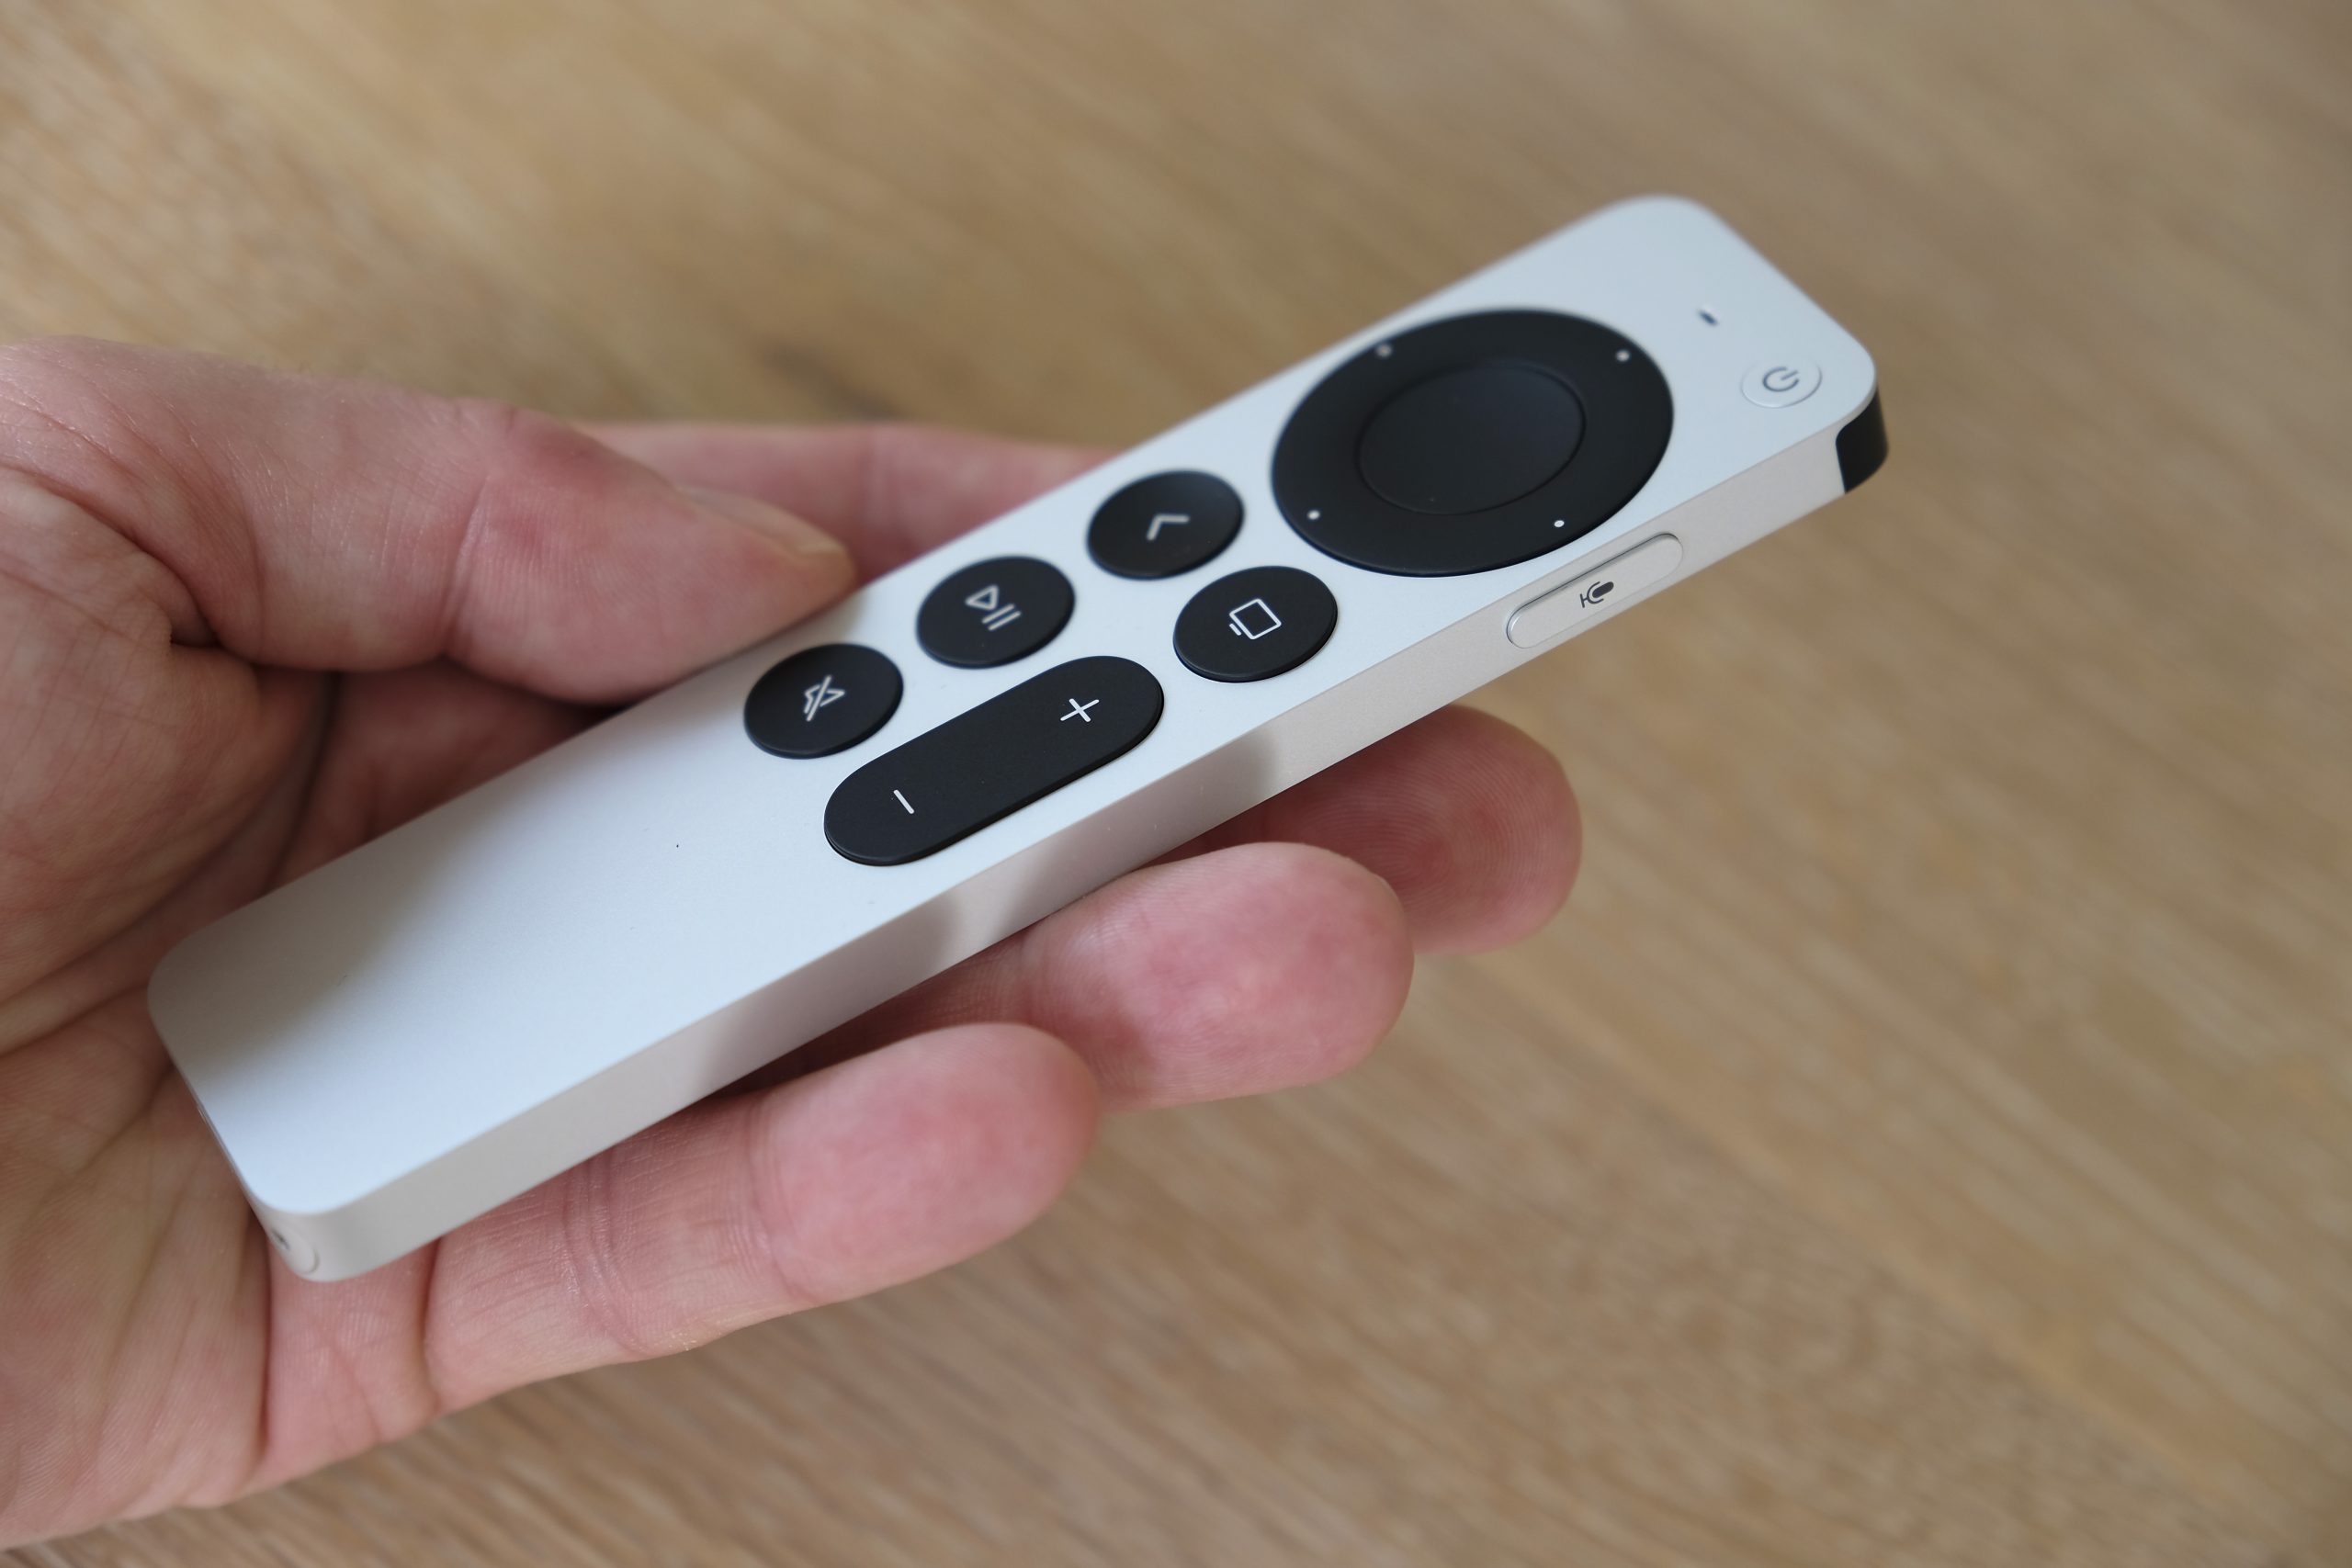 apple remote connection lost